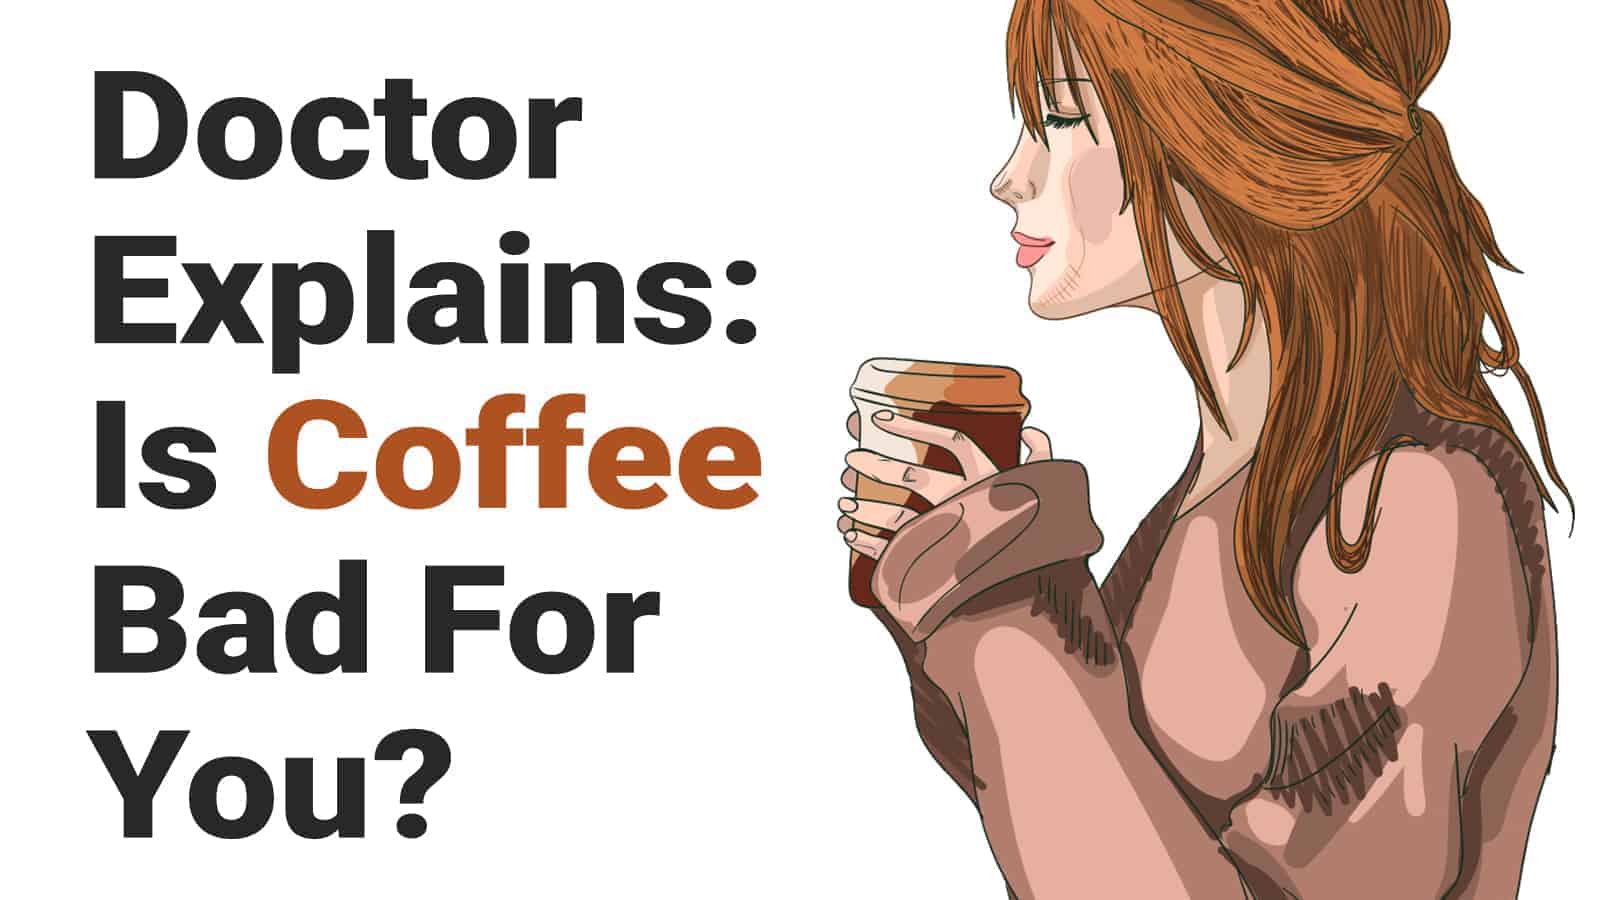 Doctor Explains: Is Coffee Bad For You?